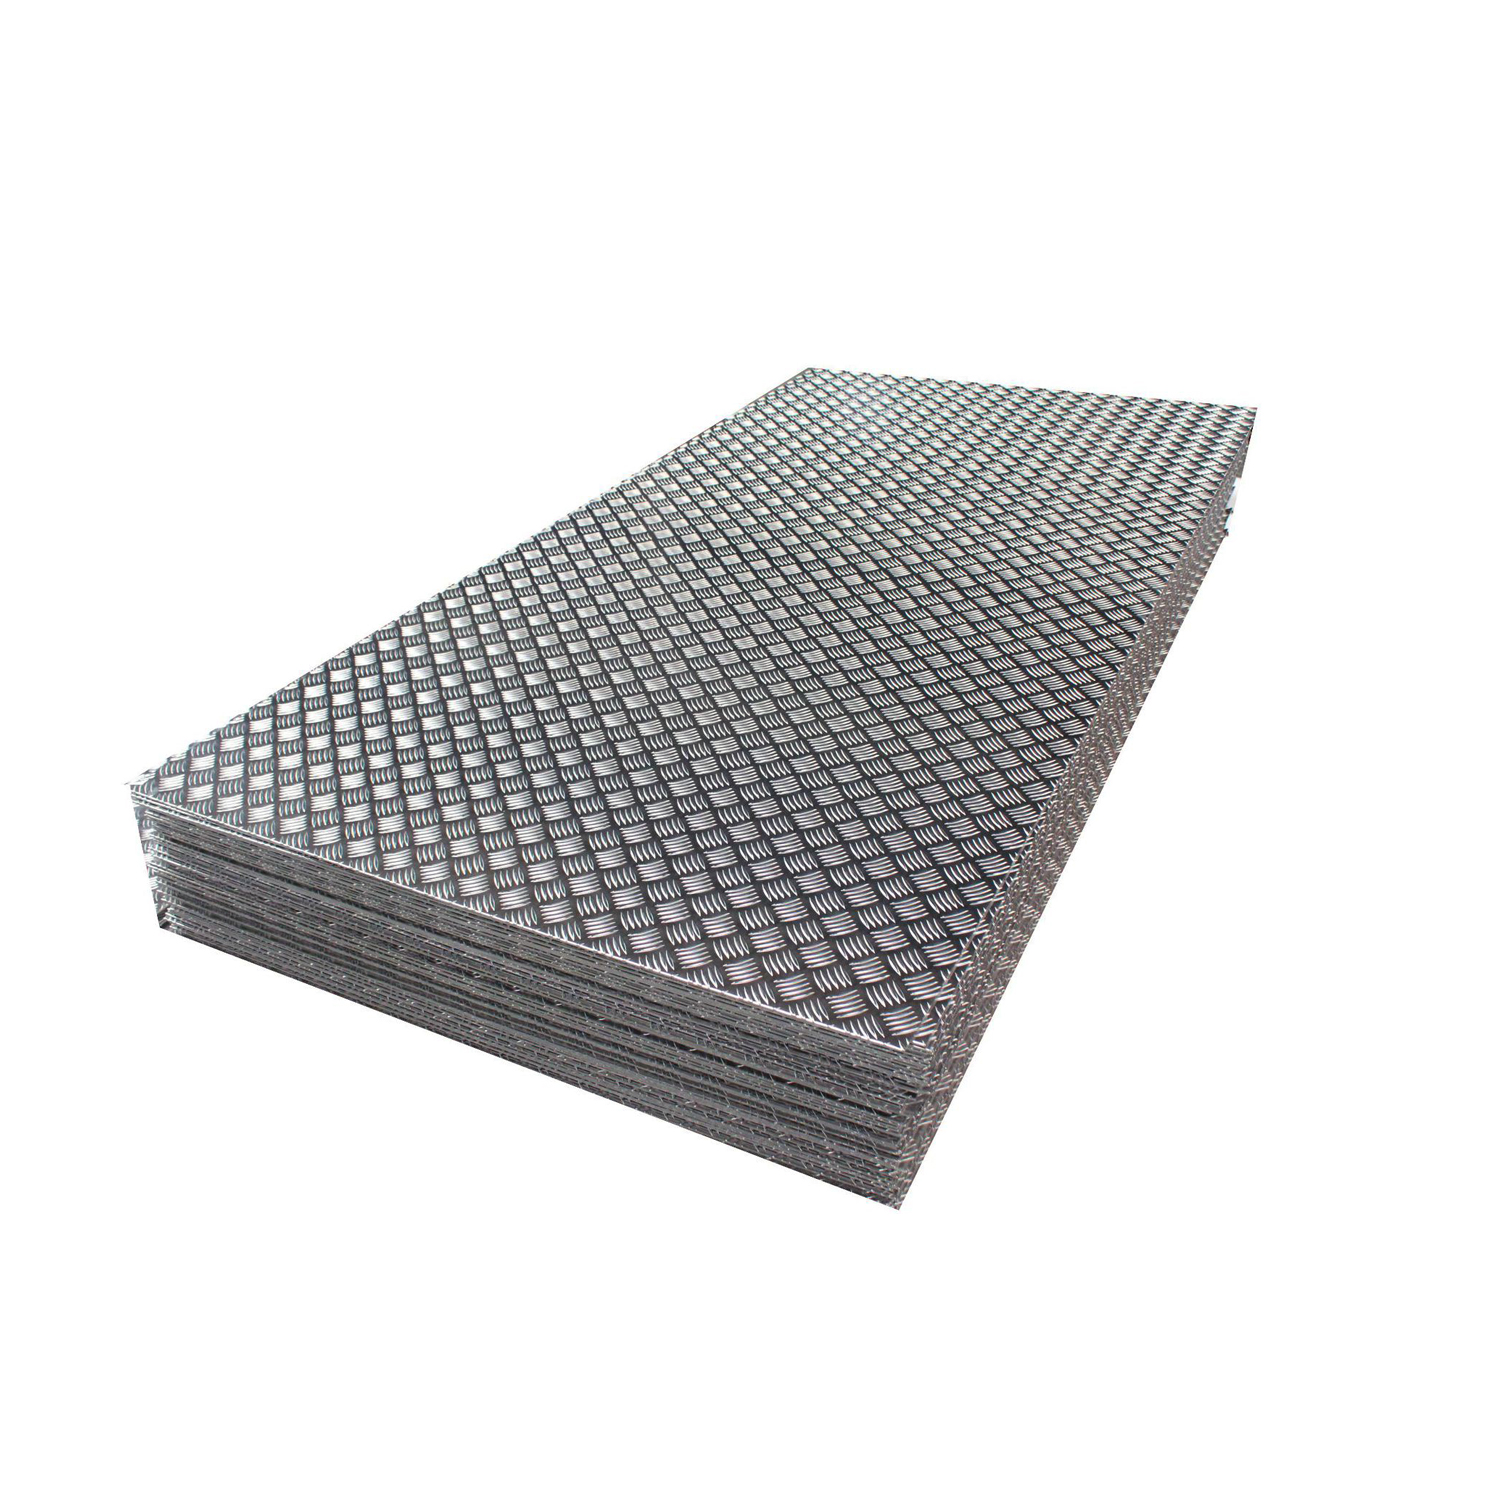 Export Good Quality Hot Rolled Carbon Steel Checkered Plate/Q235B Checked Steel Plate/Sheet S355j2g3